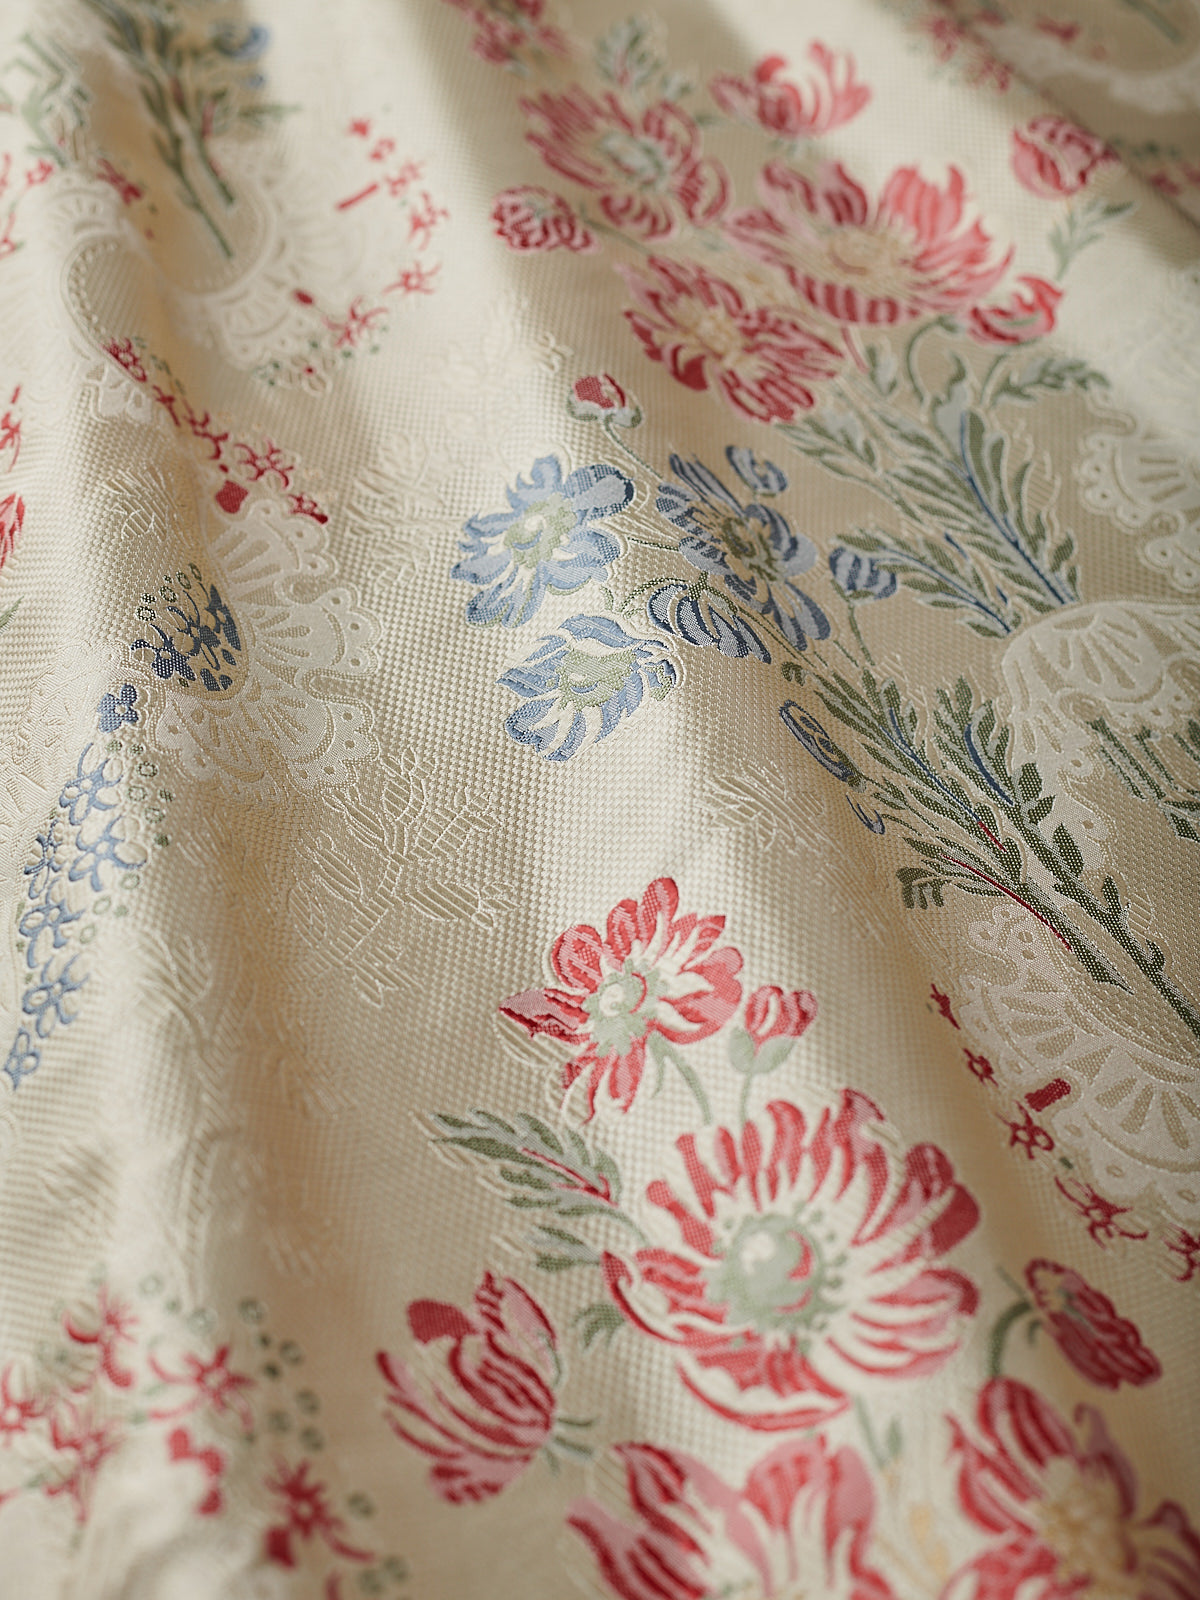 Watts 1874 Ophelia: Luxurious Silk with Delicate Floral Design